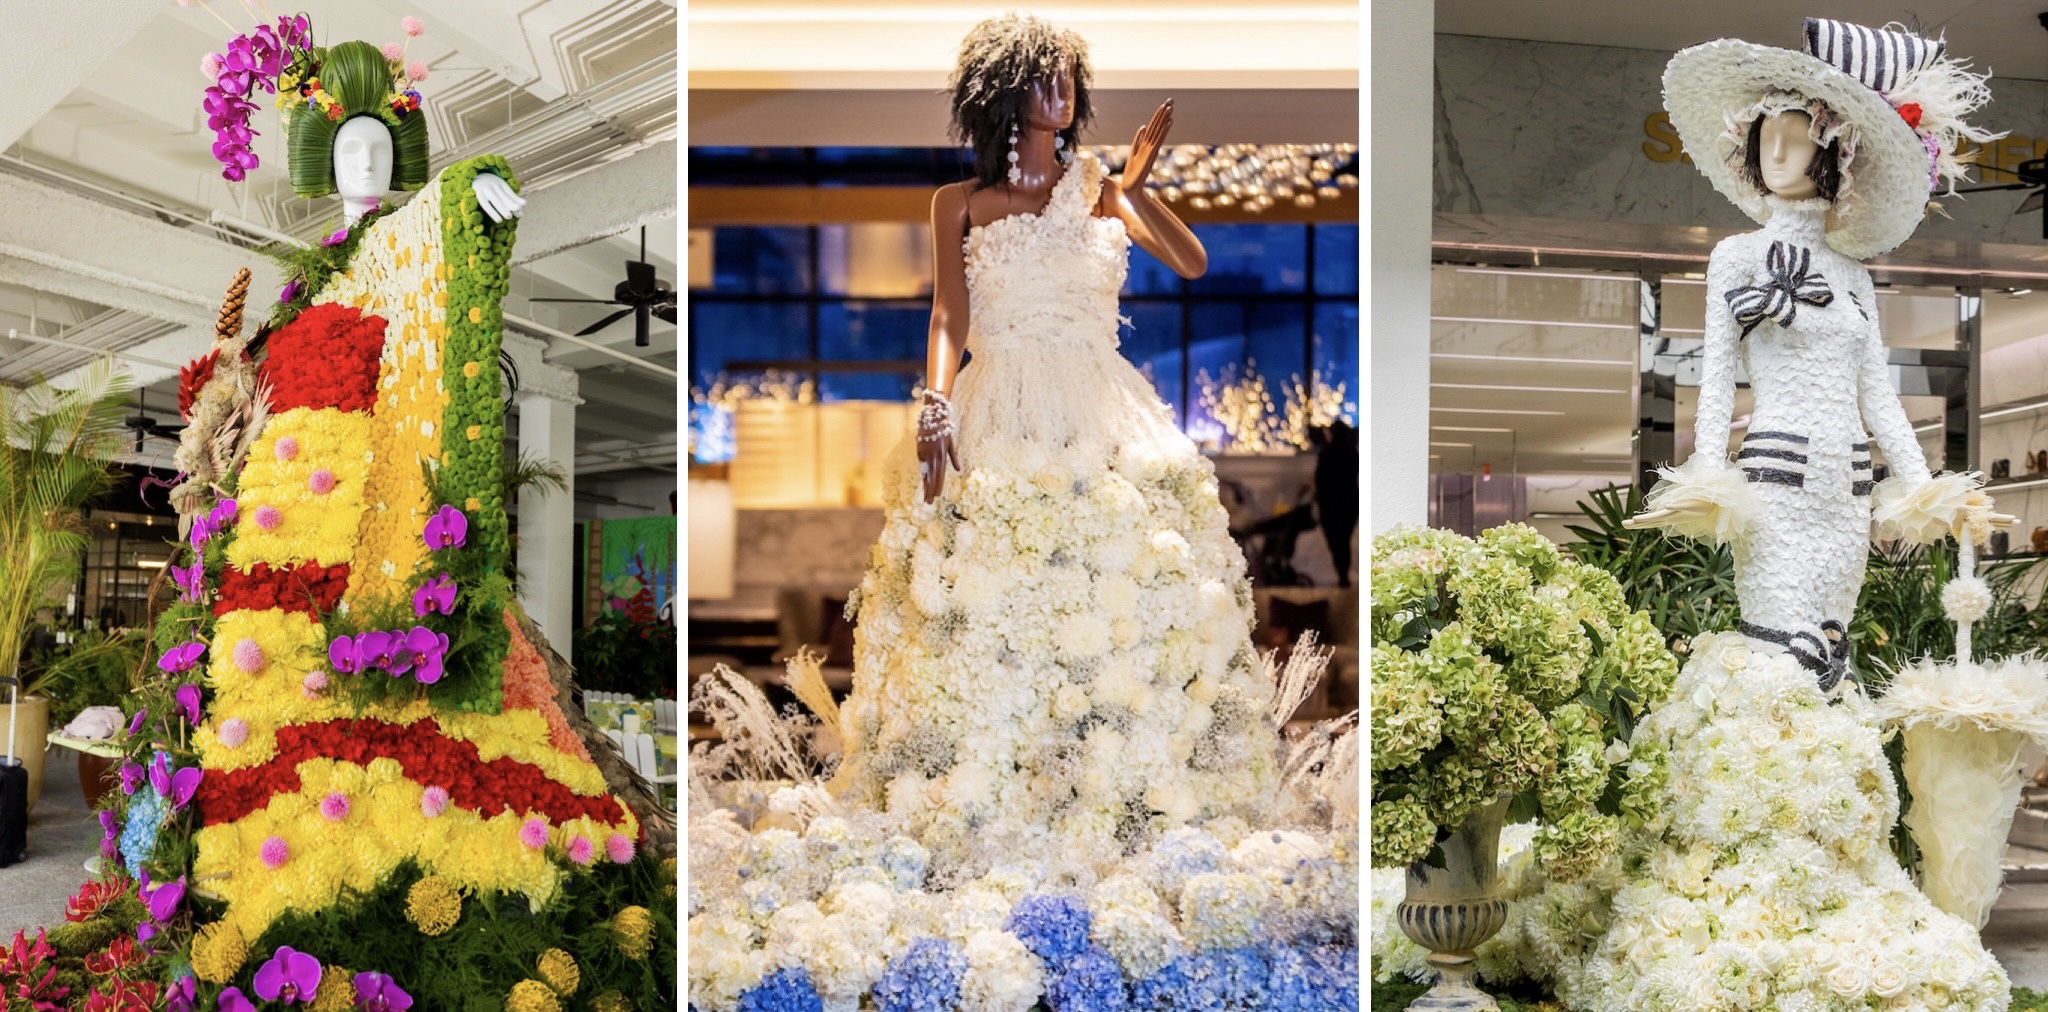 Montreal hosts a floral exhibition celebrating 13 remarkable women, May 20 to 29